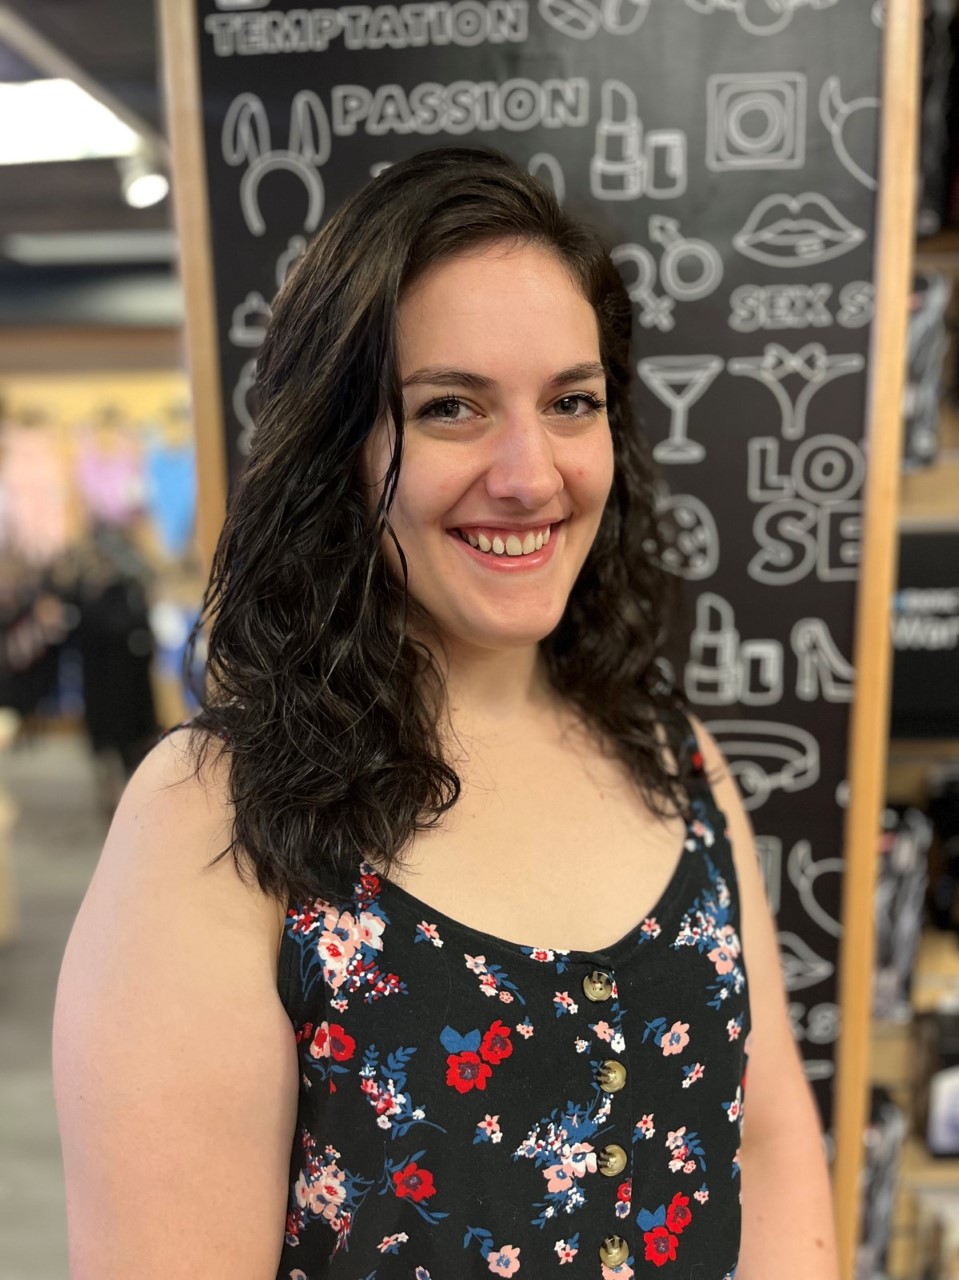 WICKED SENSUAL CARE Shines a Retail Employee Spotlight On EMILY CATTAFI of FANTASY GIFTS in Turnersville, New Jersey